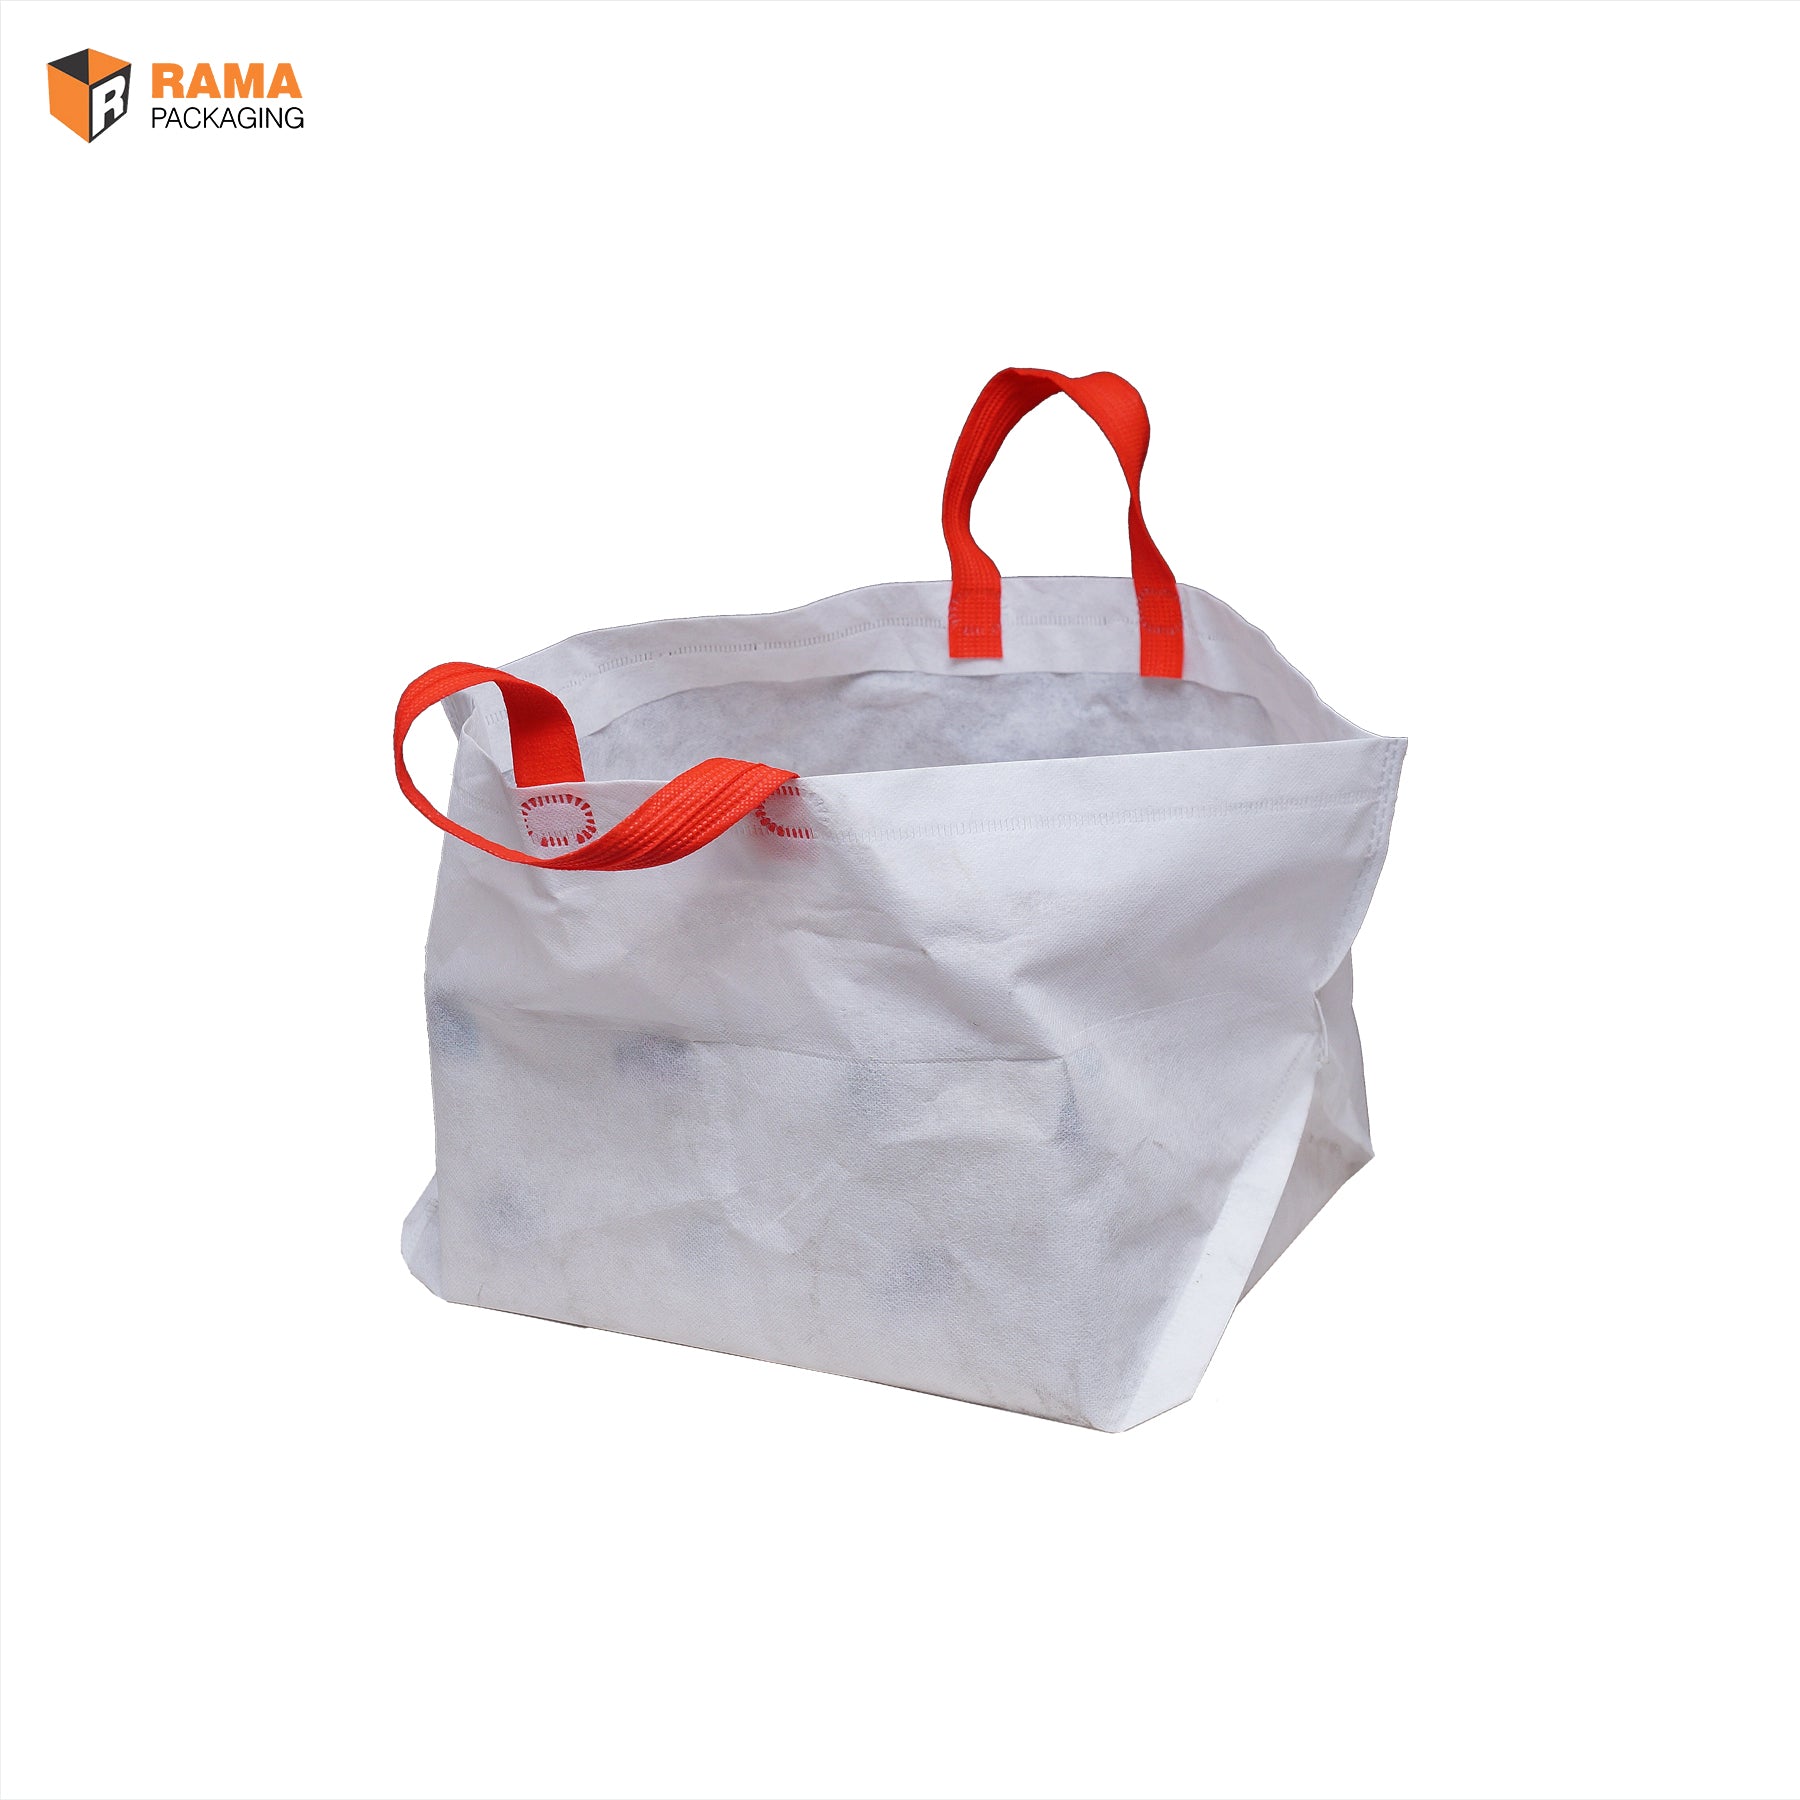 Myths Busted: The Nature of Non Woven Bags